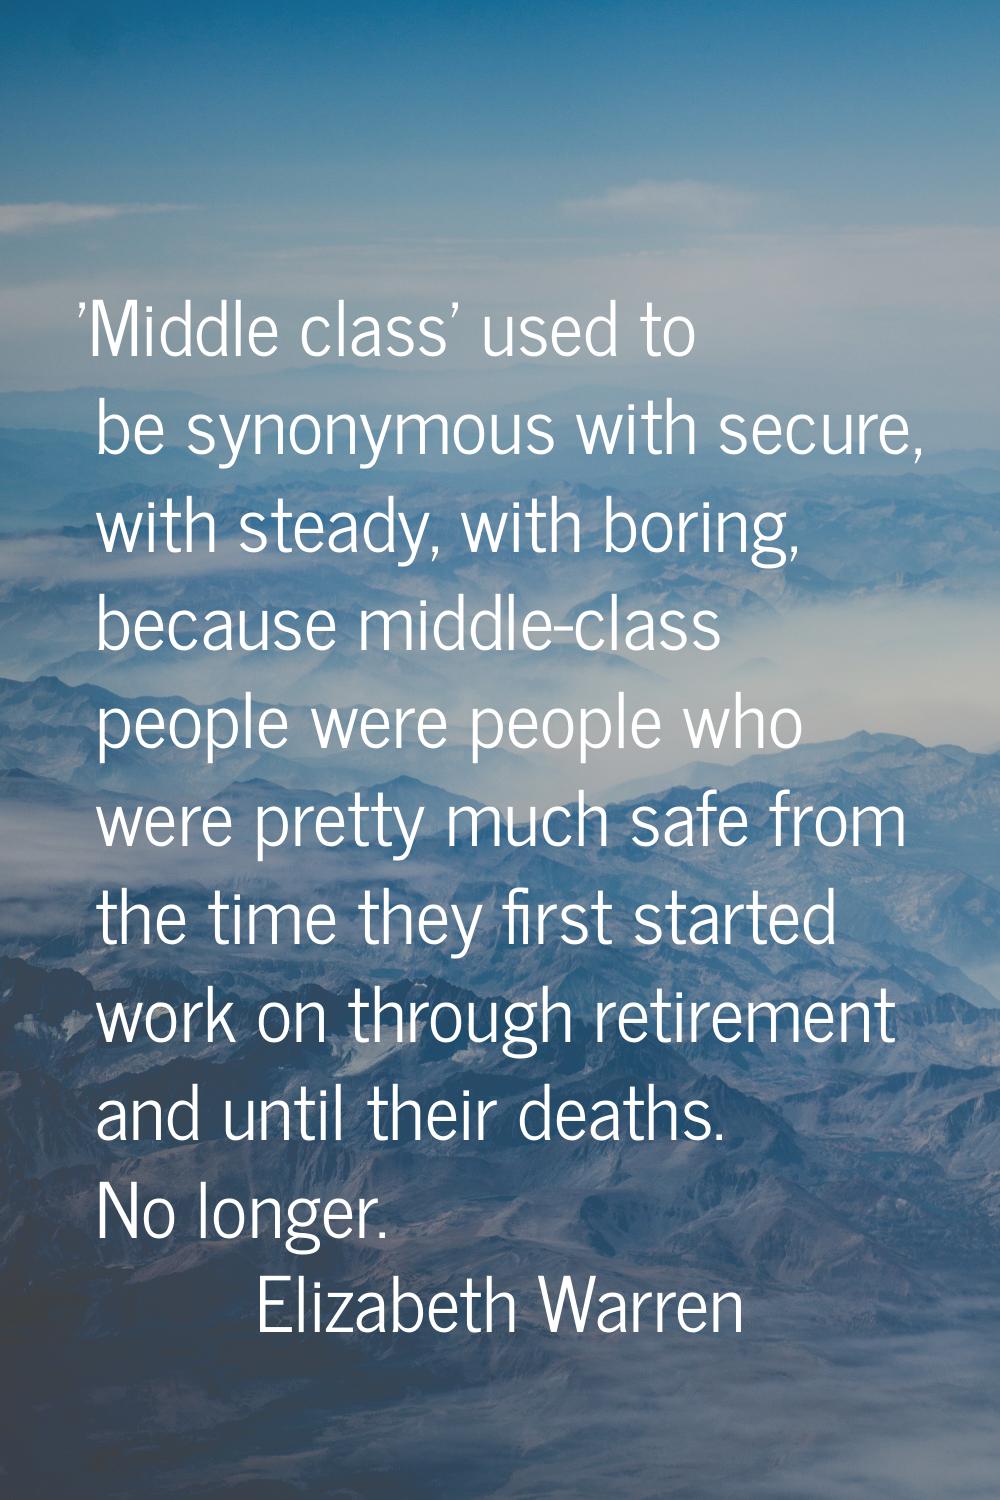 'Middle class' used to be synonymous with secure, with steady, with boring, because middle-class pe